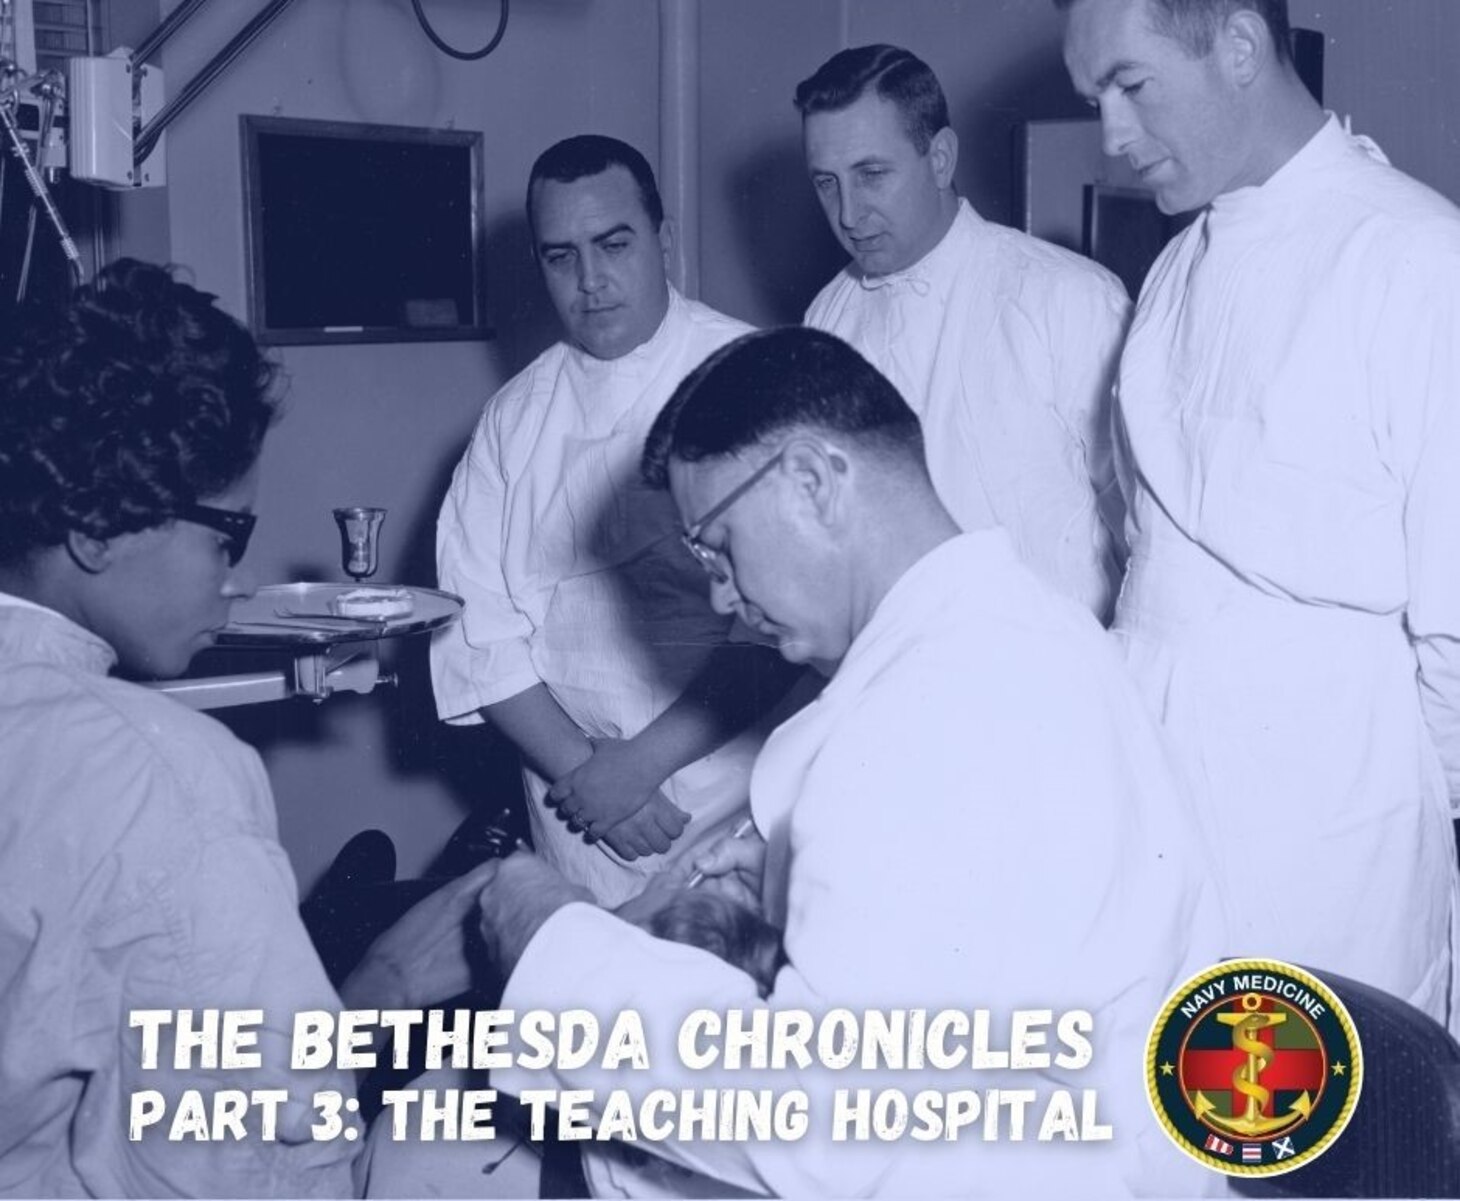 CAPT Ted Hunley and Dental Technician Deborah Phinny demonstrate the use of the advanced speed air turbine handpiece in cavity preparation to post graduate students at the Naval Dental School, December 20, 1963.  BUMED Archives.